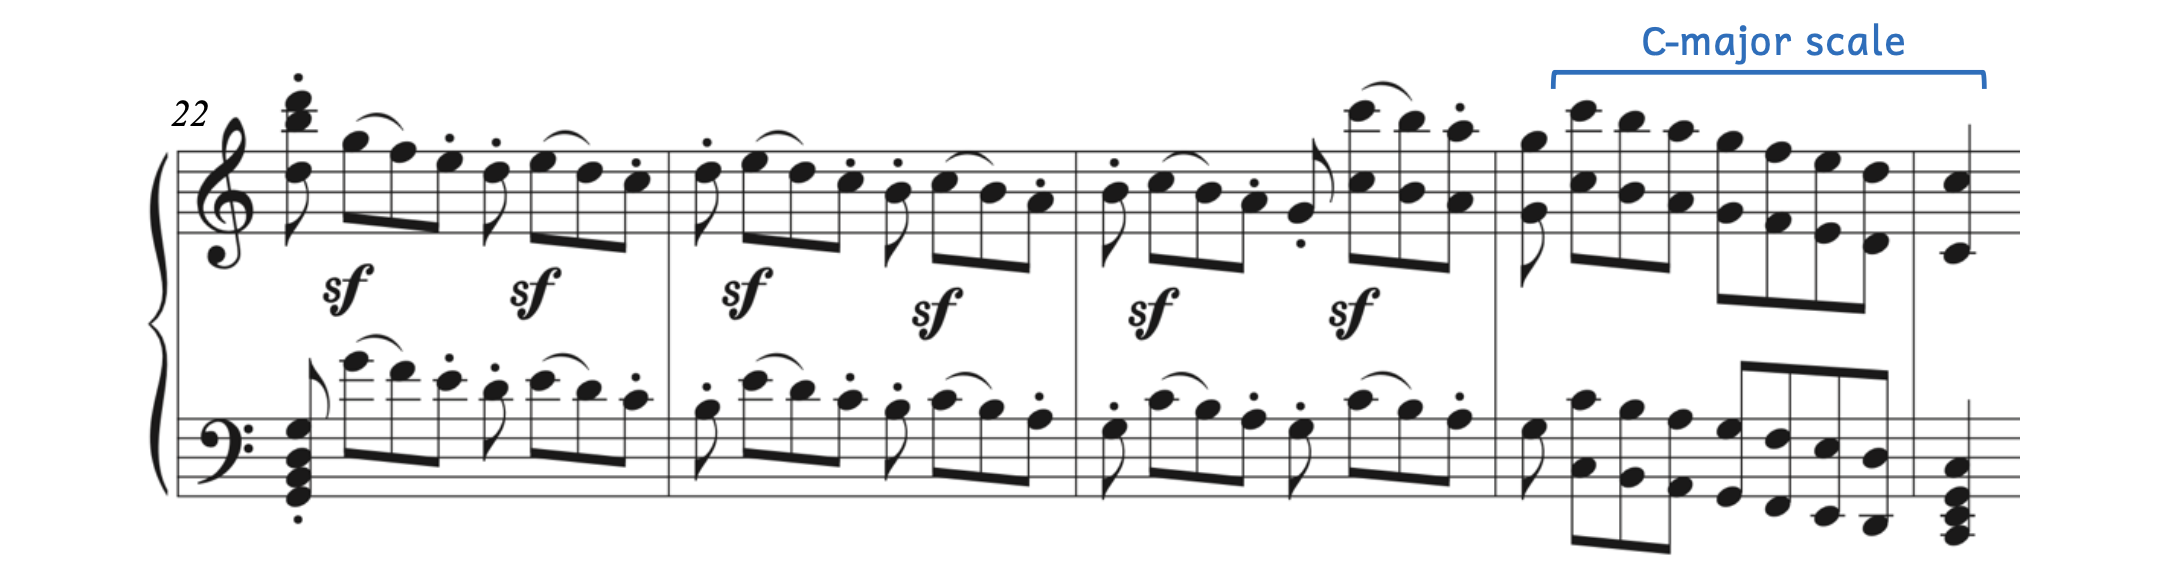 Descending major scale in Beethoven's Symphony No. 5 in C Minor, Op. 67, fourth movement - Allegro. The example closes with a descending C-major scale.